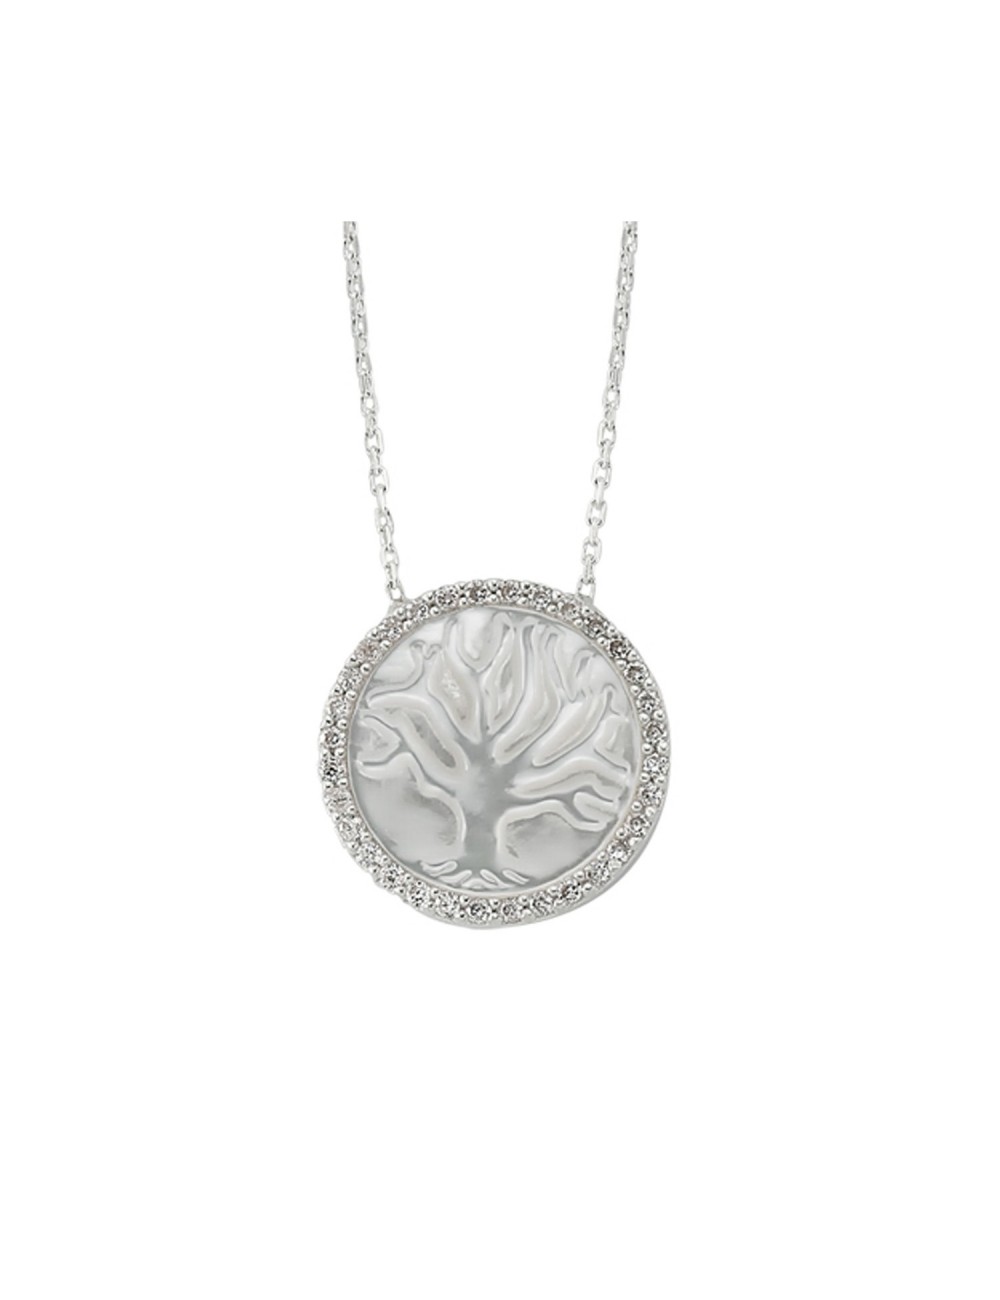 STERLING SILVER TREE OF LIFE NECKLACE & CZ CIRCUMFERENCE